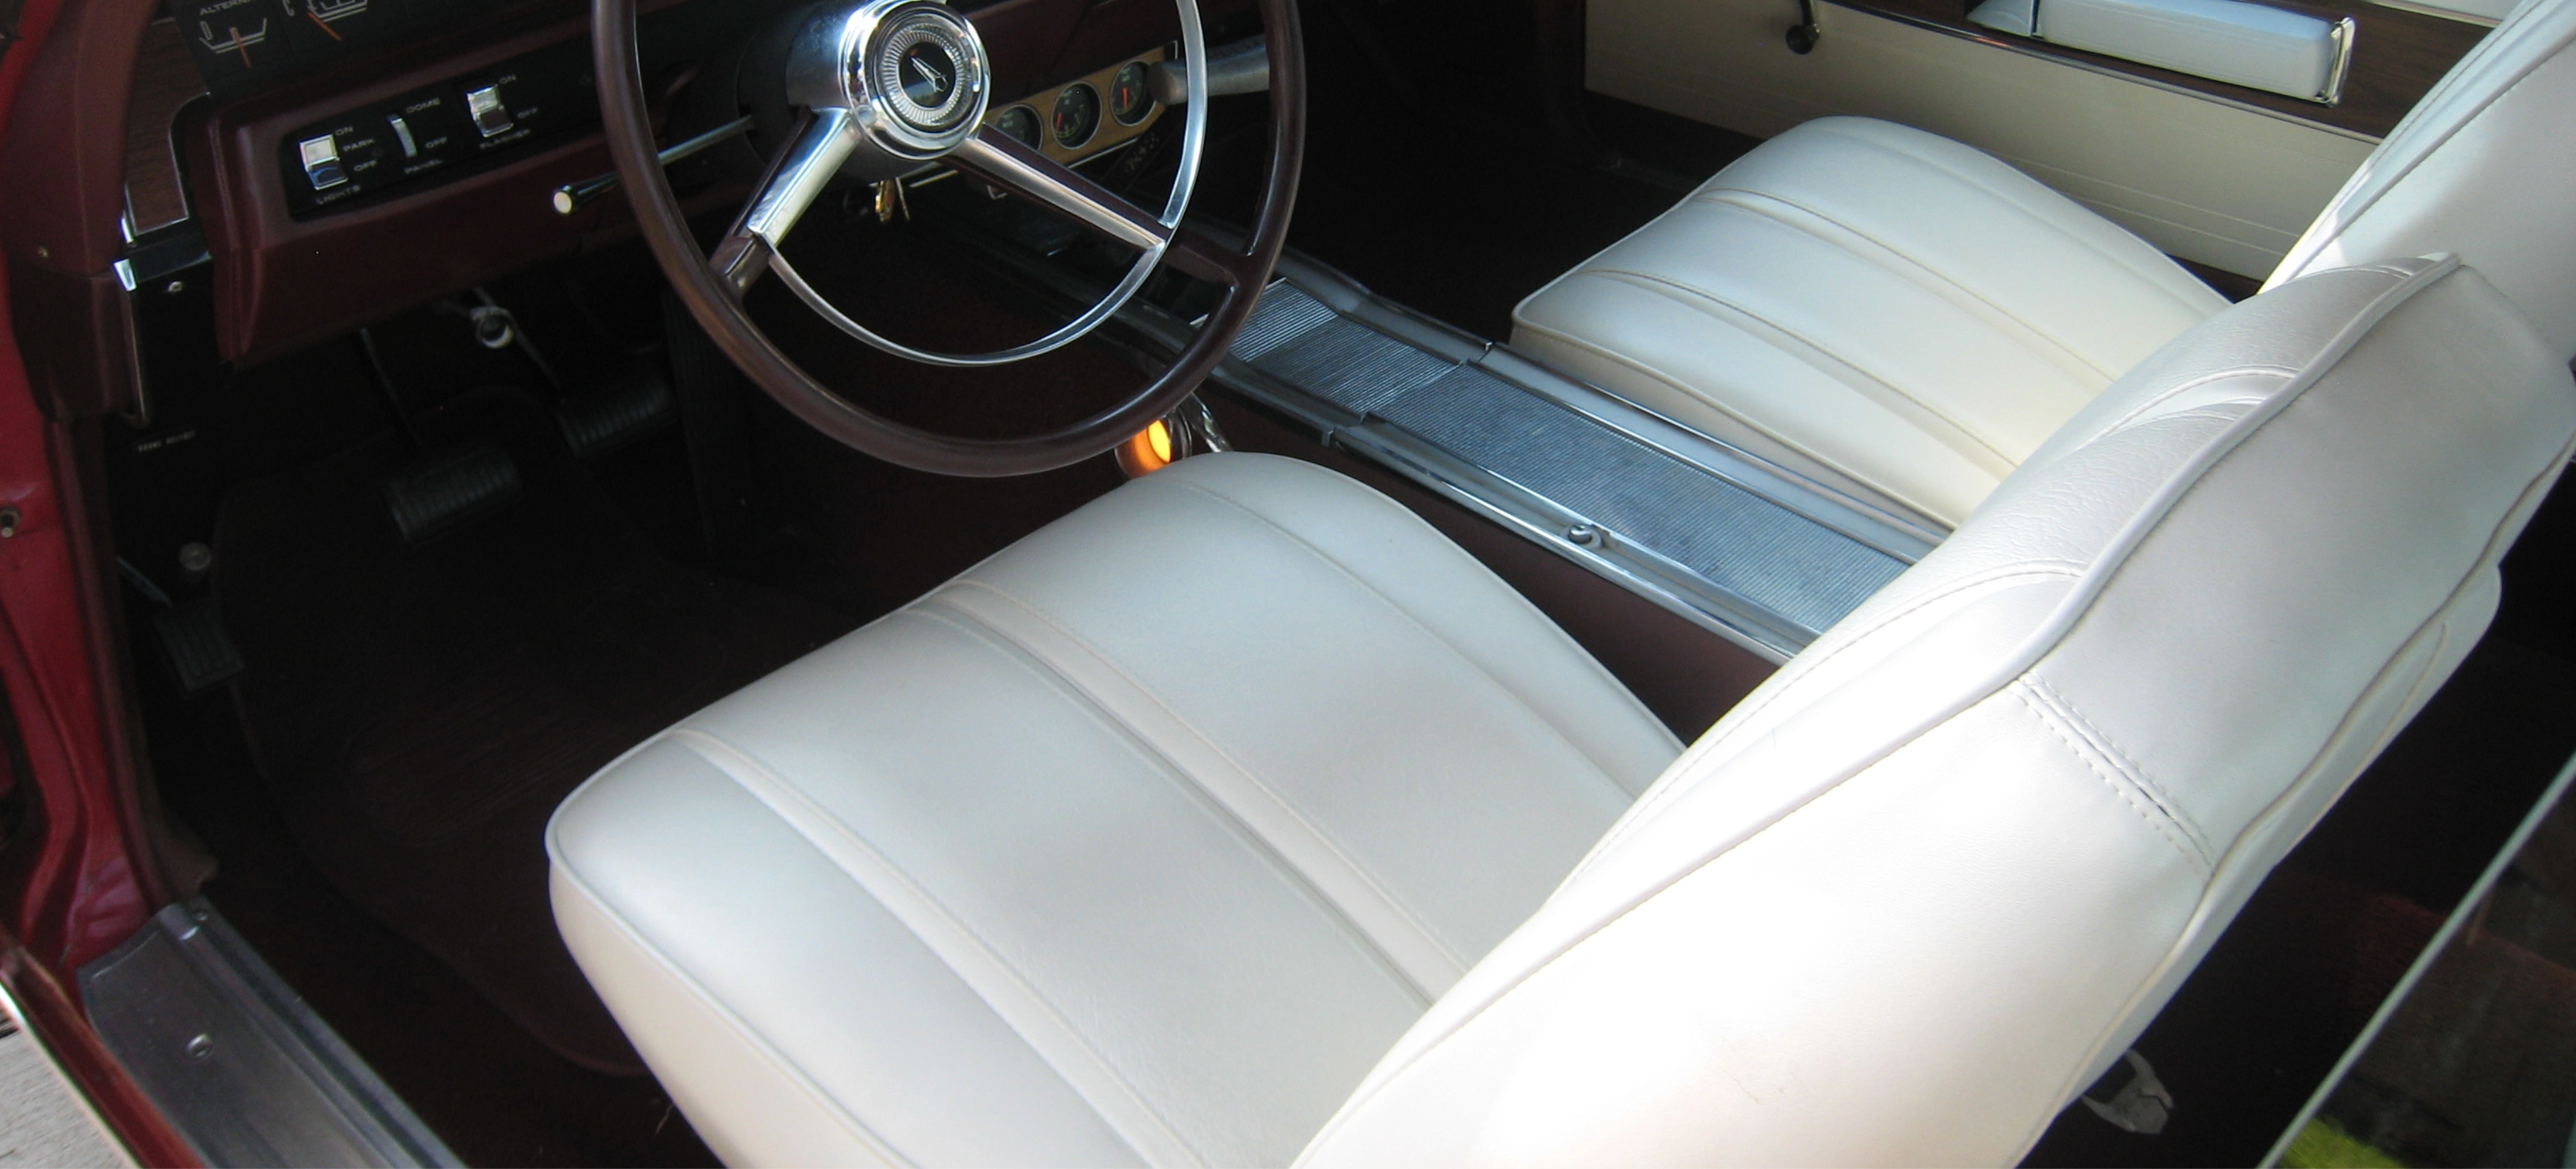 12 Must-Have Classic Car Accessories